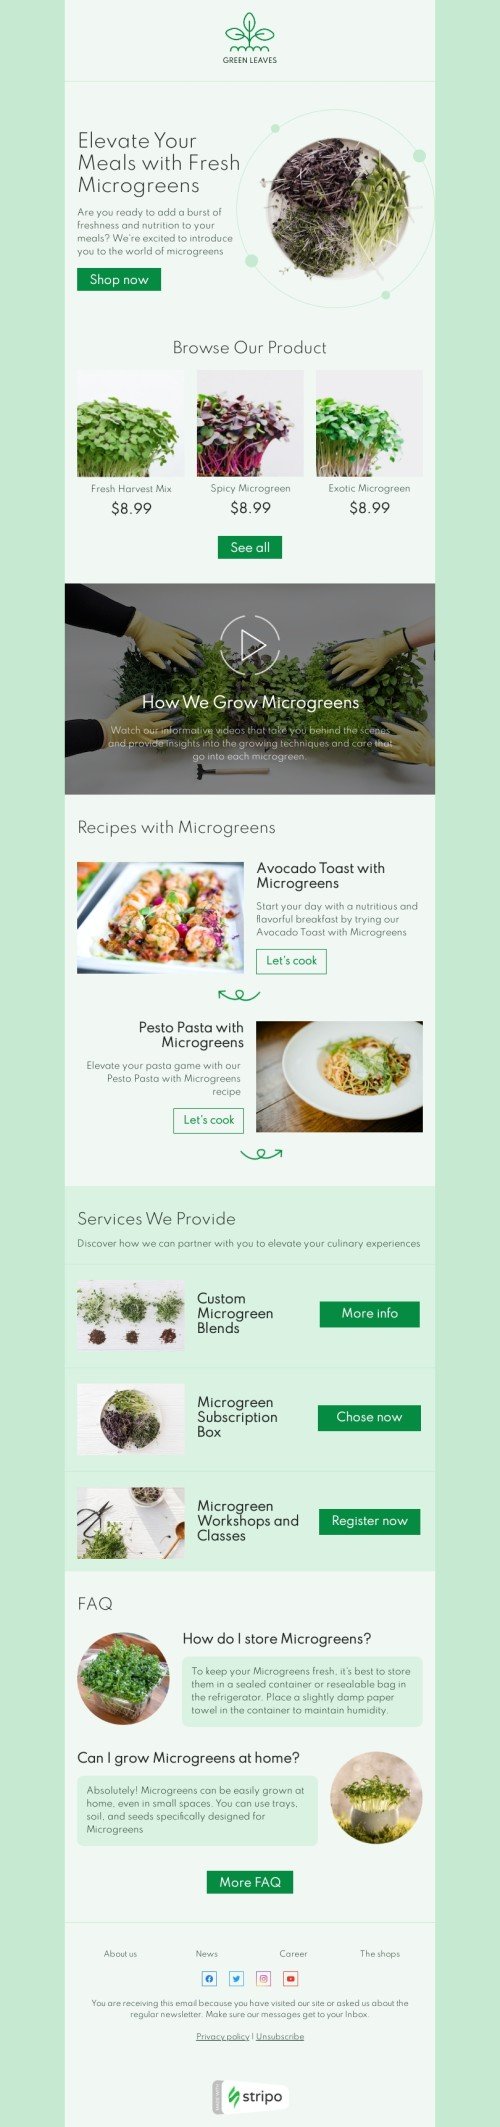 Promo email template "Elevate your meals" for agriculture industry desktop view